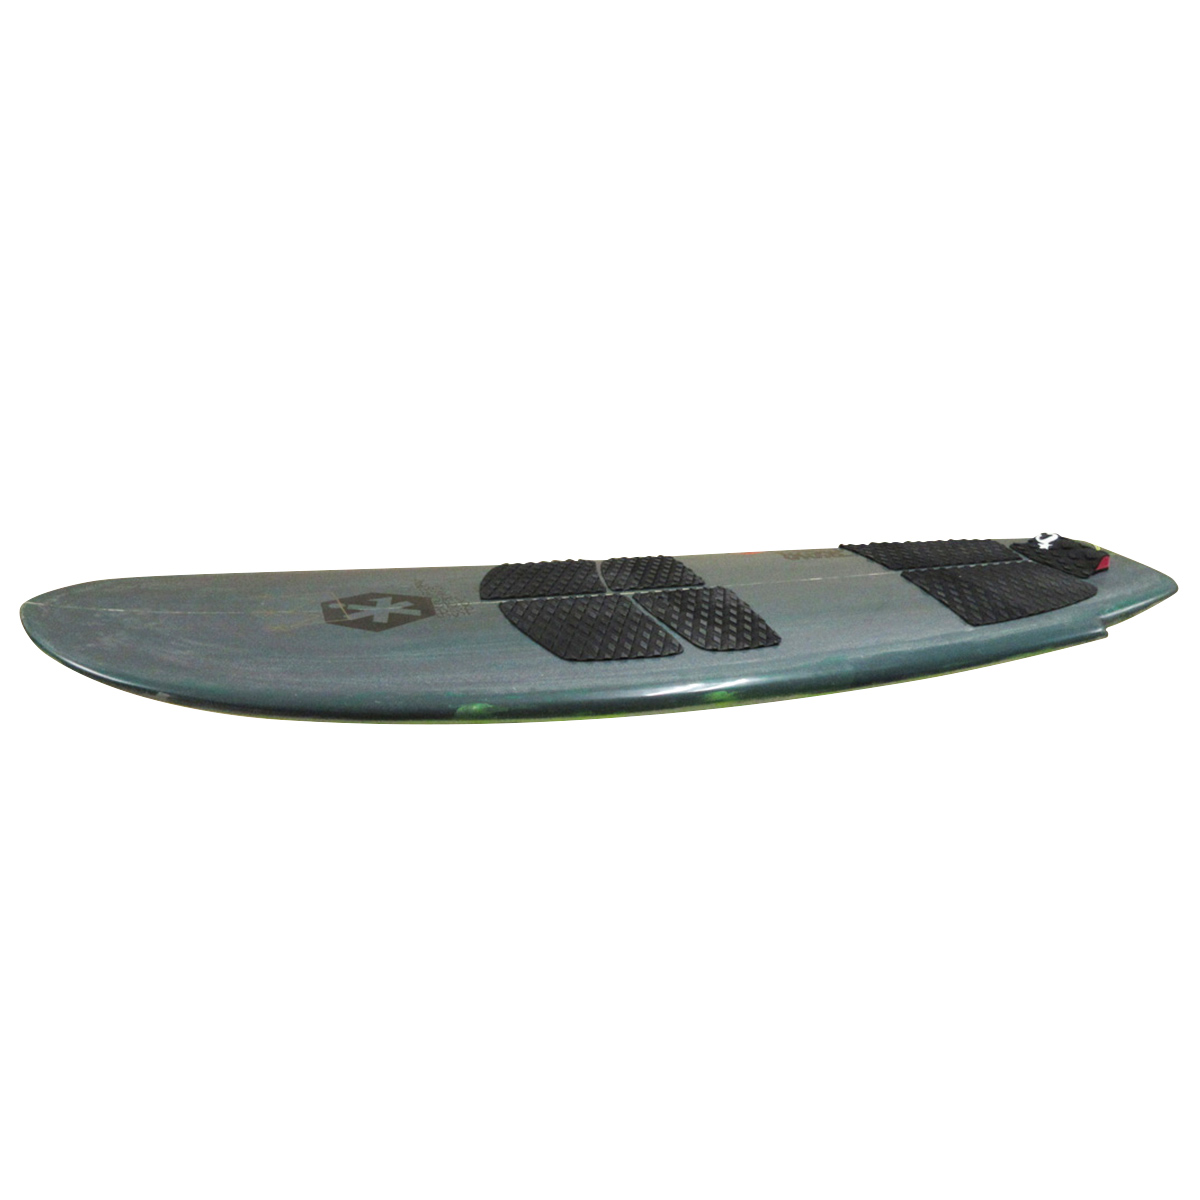 SEXON SUPER PEACE x RIVER MOUTH SURFBOARDS / SIMMONS 5`4